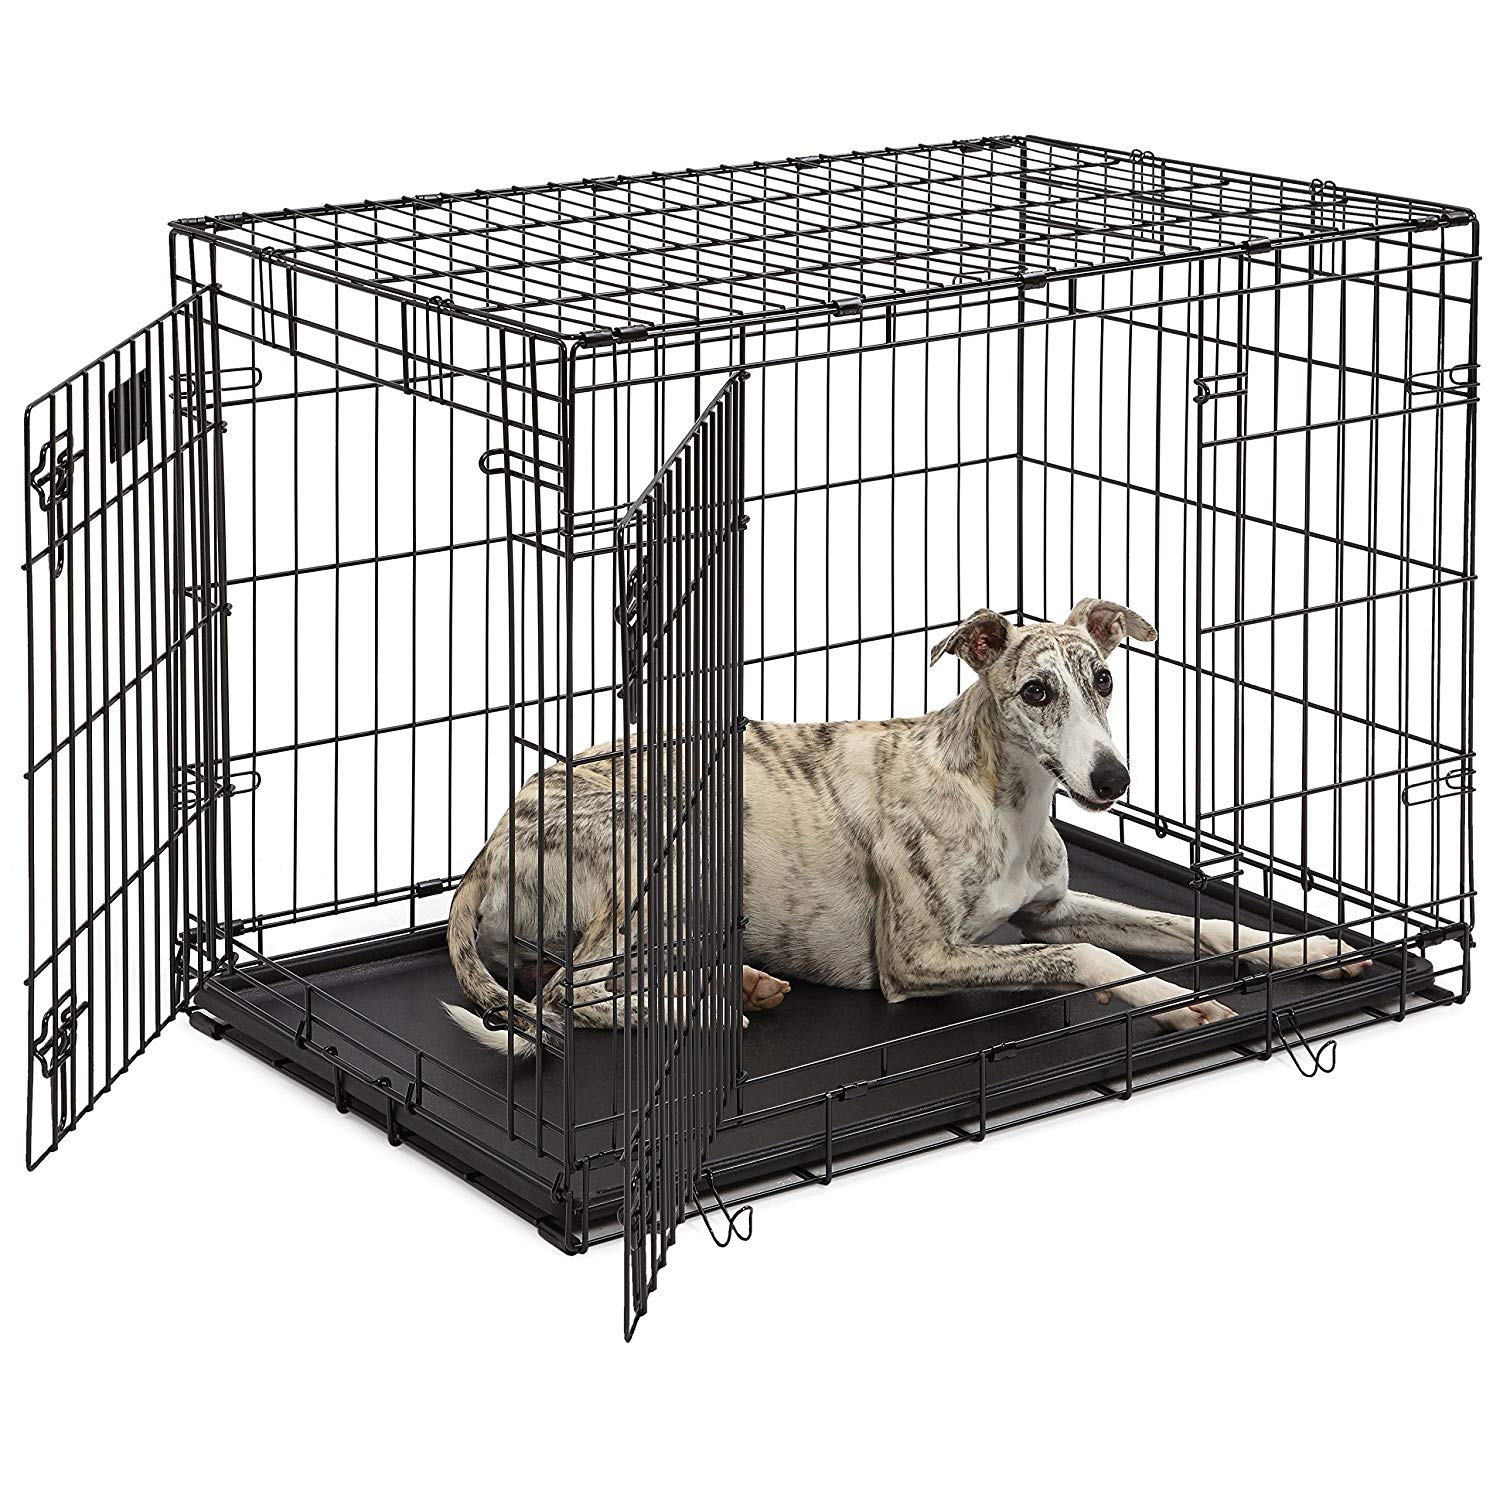 Dog Crate | MidWest Life Stages 36" Double Door Folding Metal Dog Crate | Divider Panel, Floor Protecting Feet, Leak-Proof Dog Tray | 36L x 24W x 27H Inches, Intermediate Dog Breed